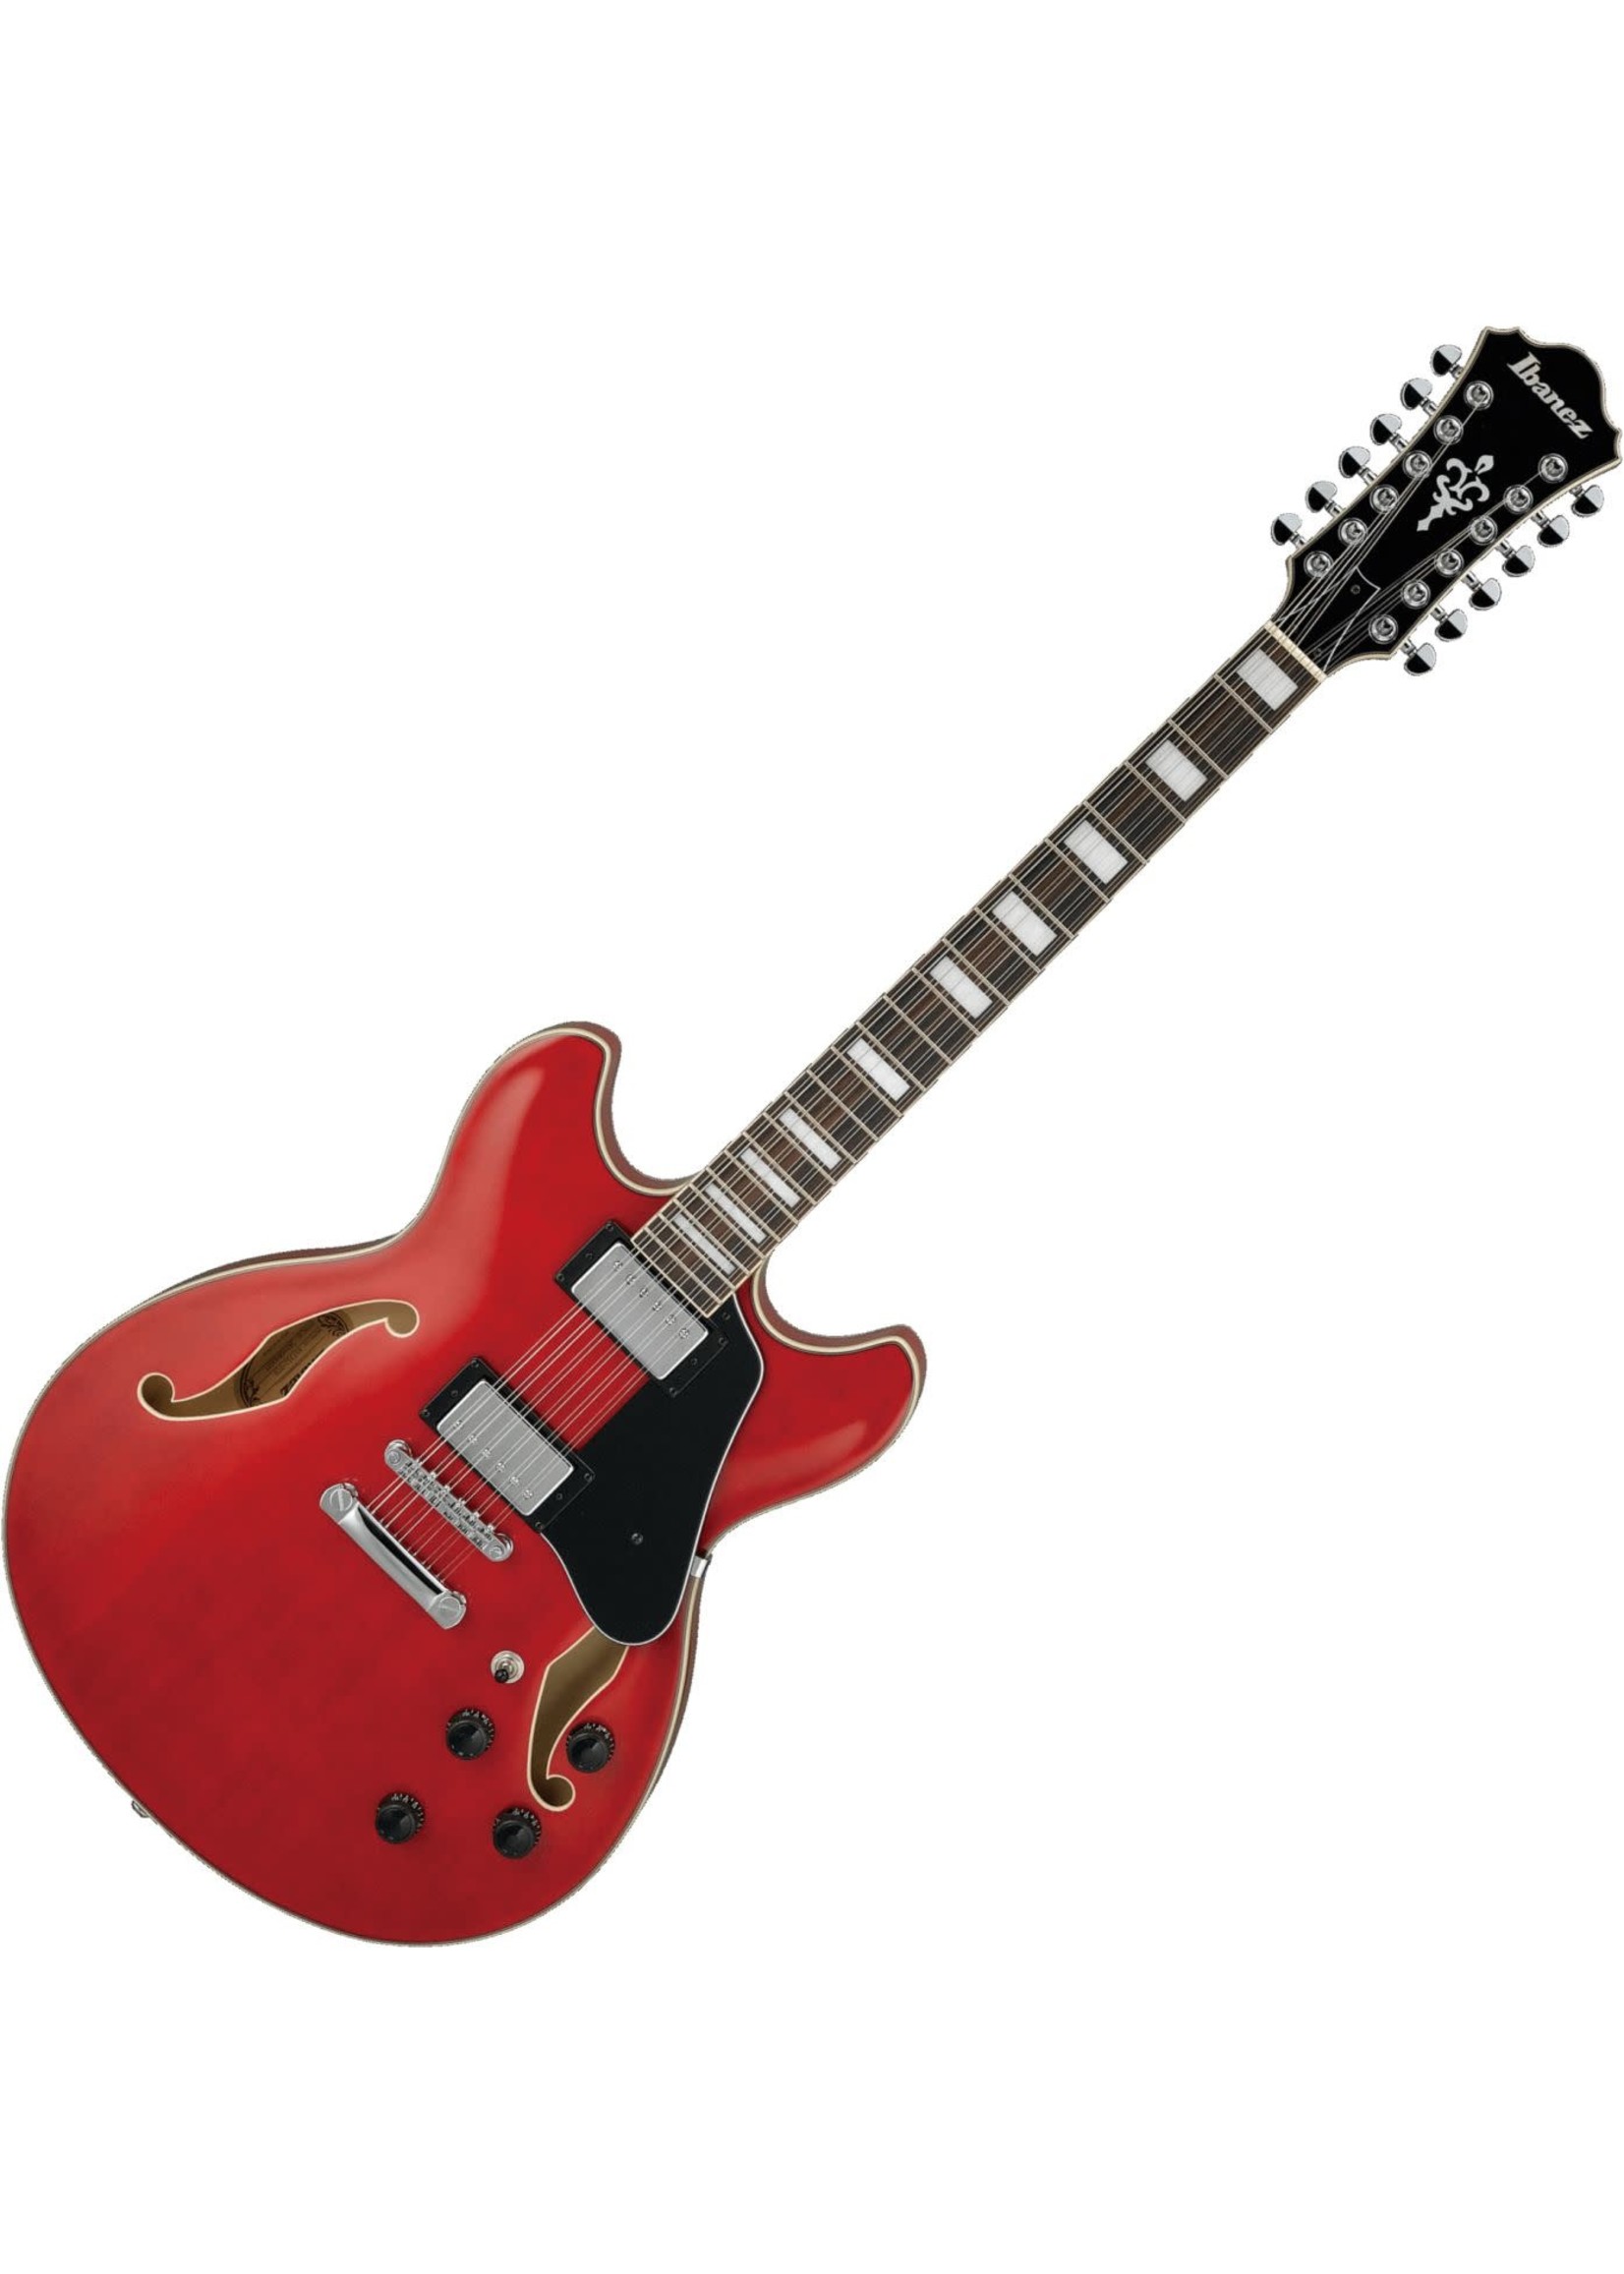 IBANEZ Ibanez AS7312TCD Artcore Series 12-String RH Semi-Hollow Electric Guitar-Transparent Cherry Red as-7312-tcd